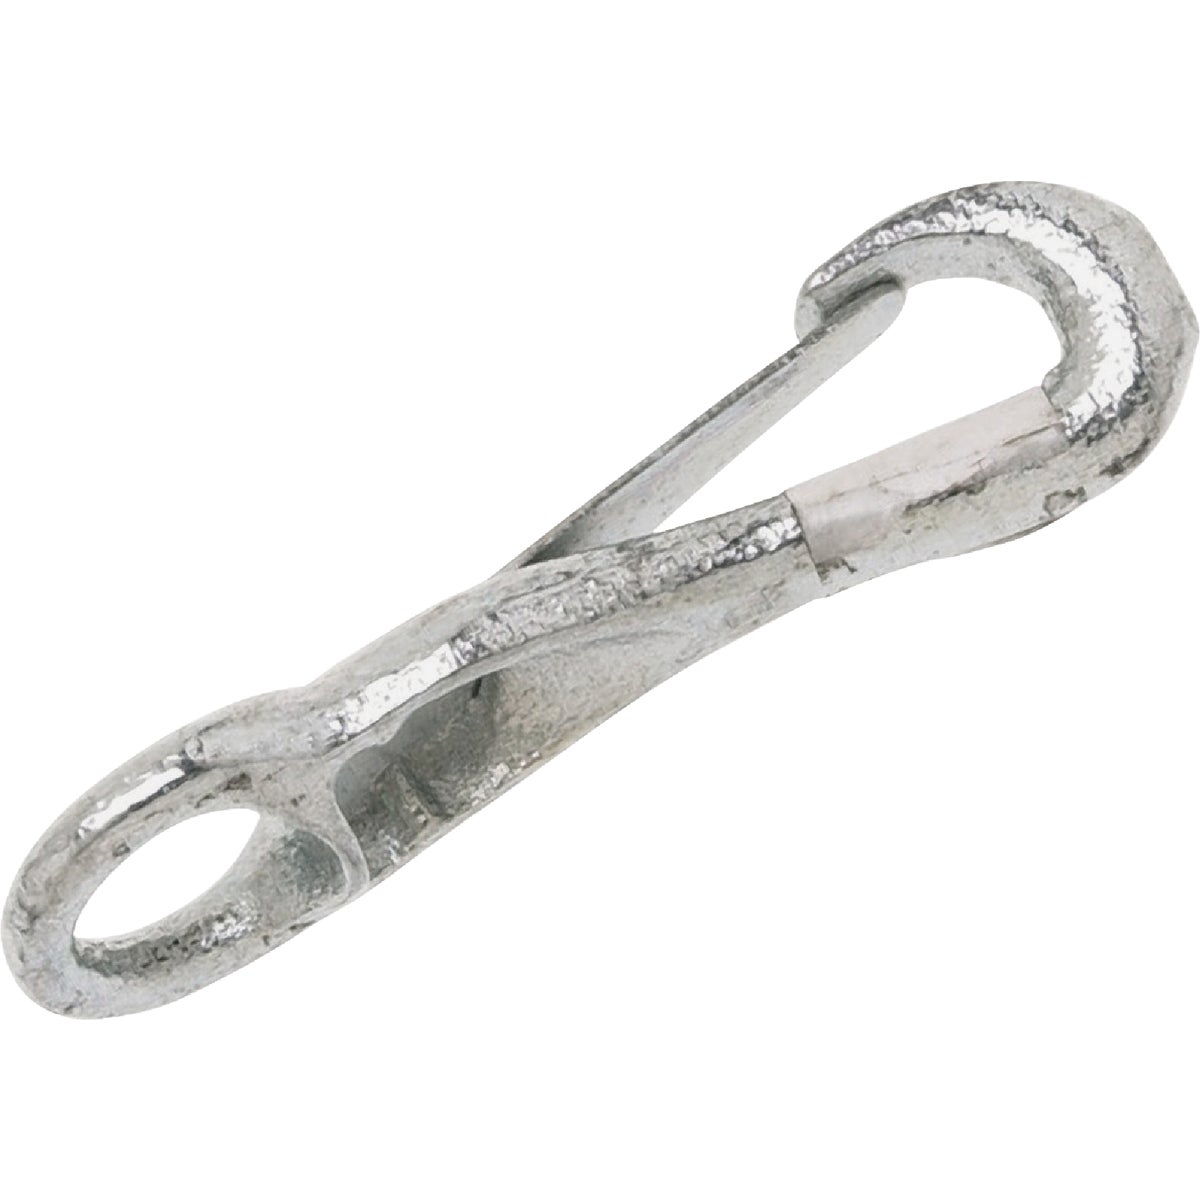 Item 769310, Rigid round eye spring snap. Features a durable zinc finish for long life.